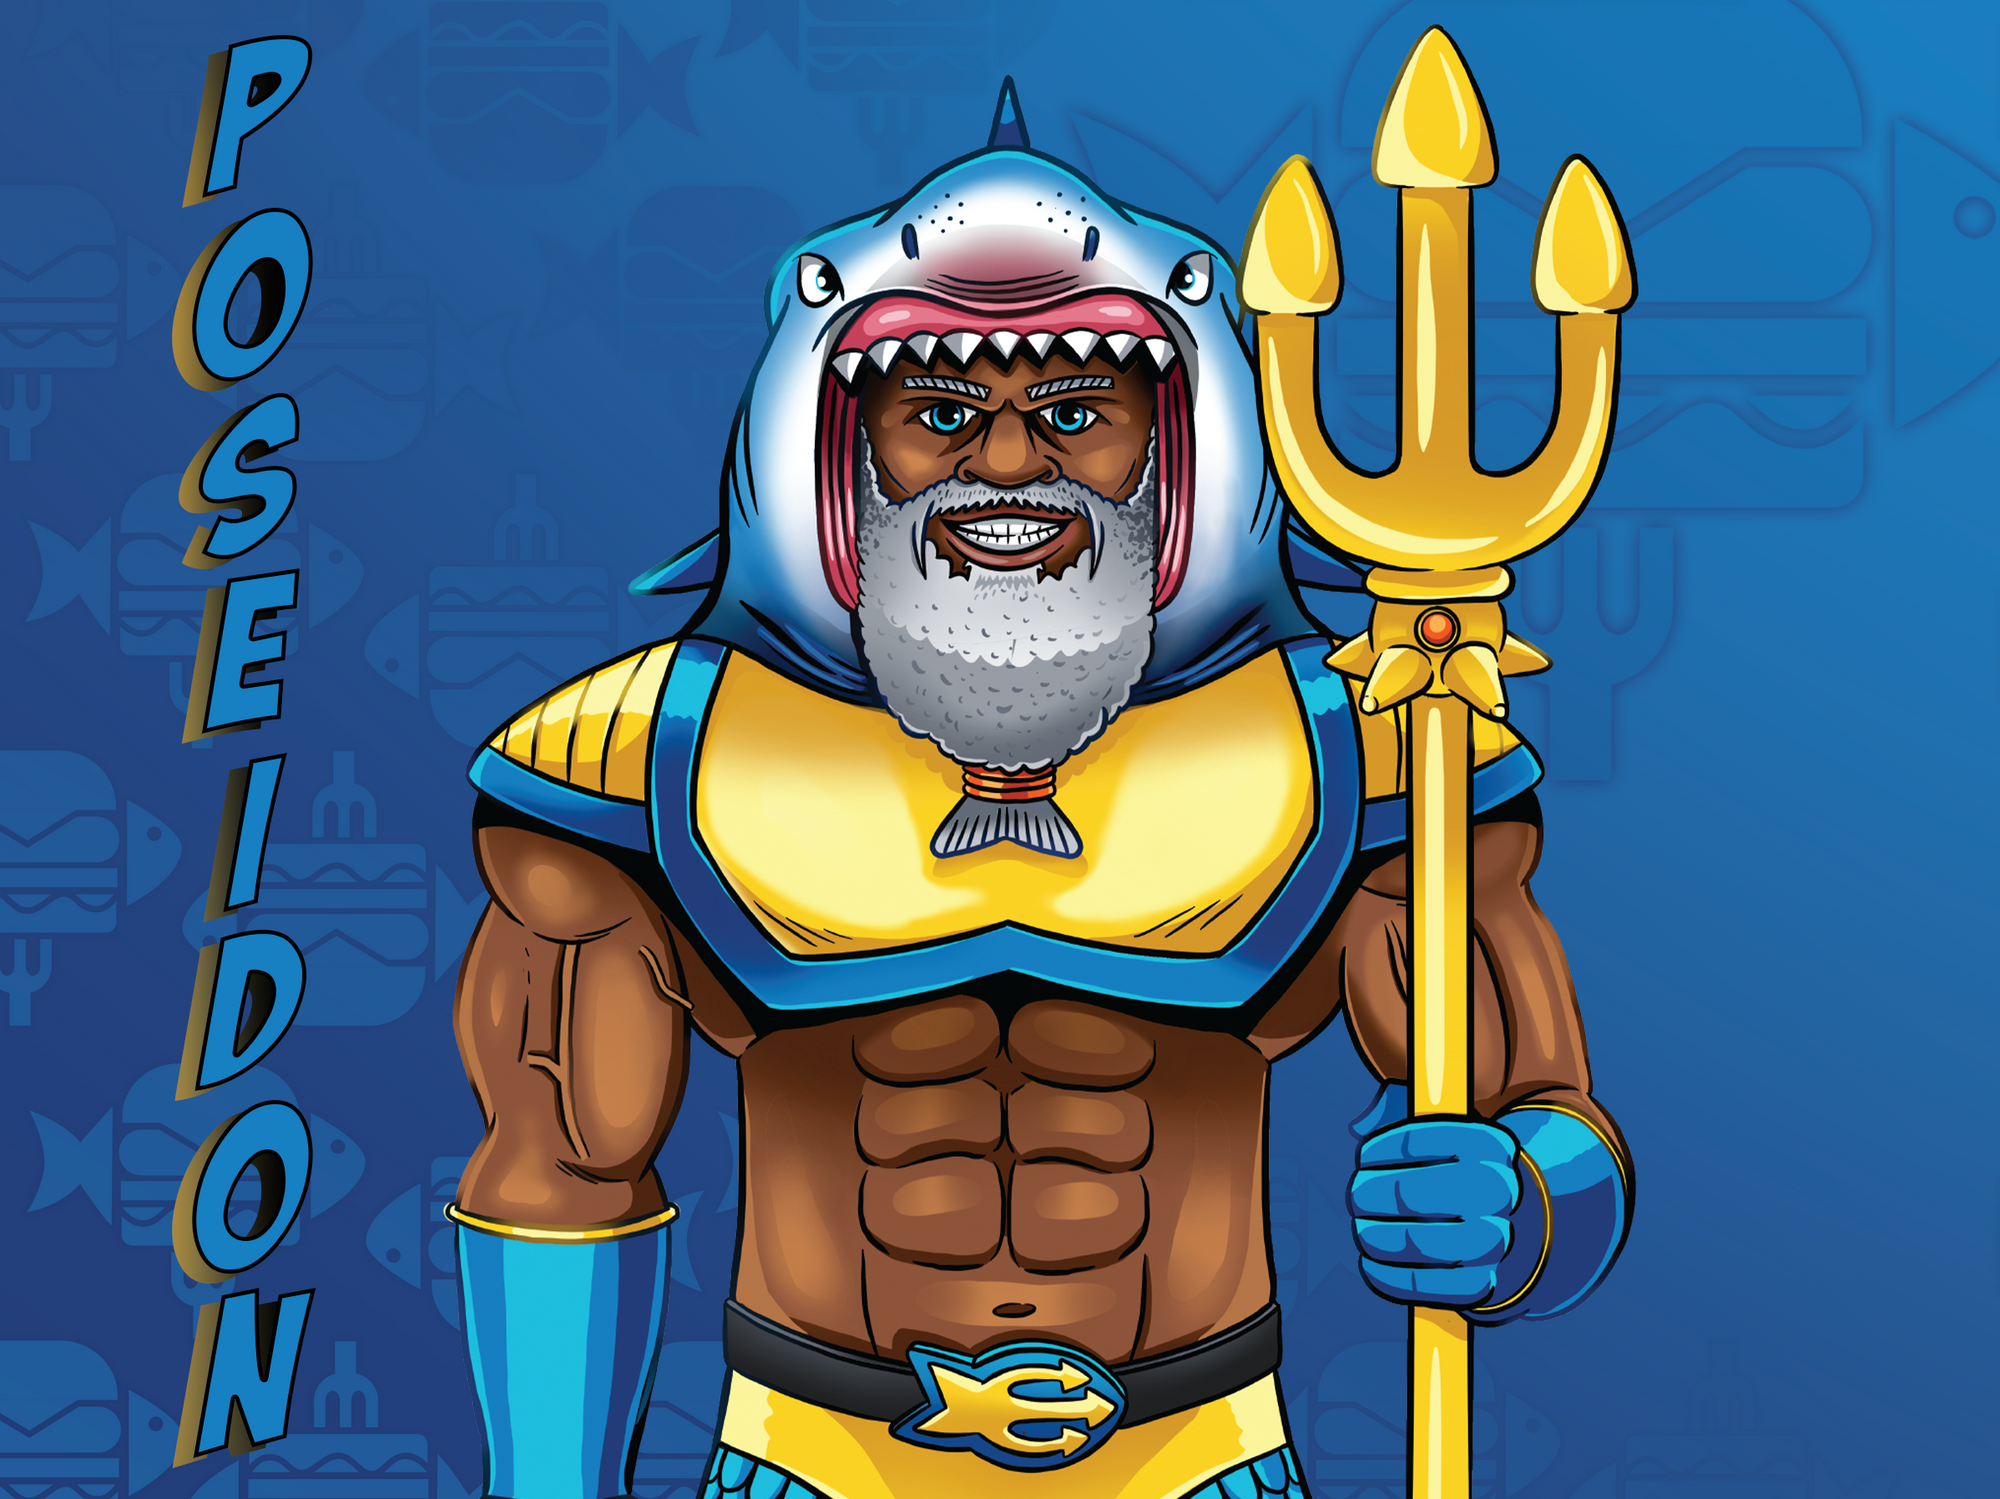 Comic style Greek Mythology character, with trident and a cerulean blue shark hat with fish sandwich icon in background, with name title Poseidon